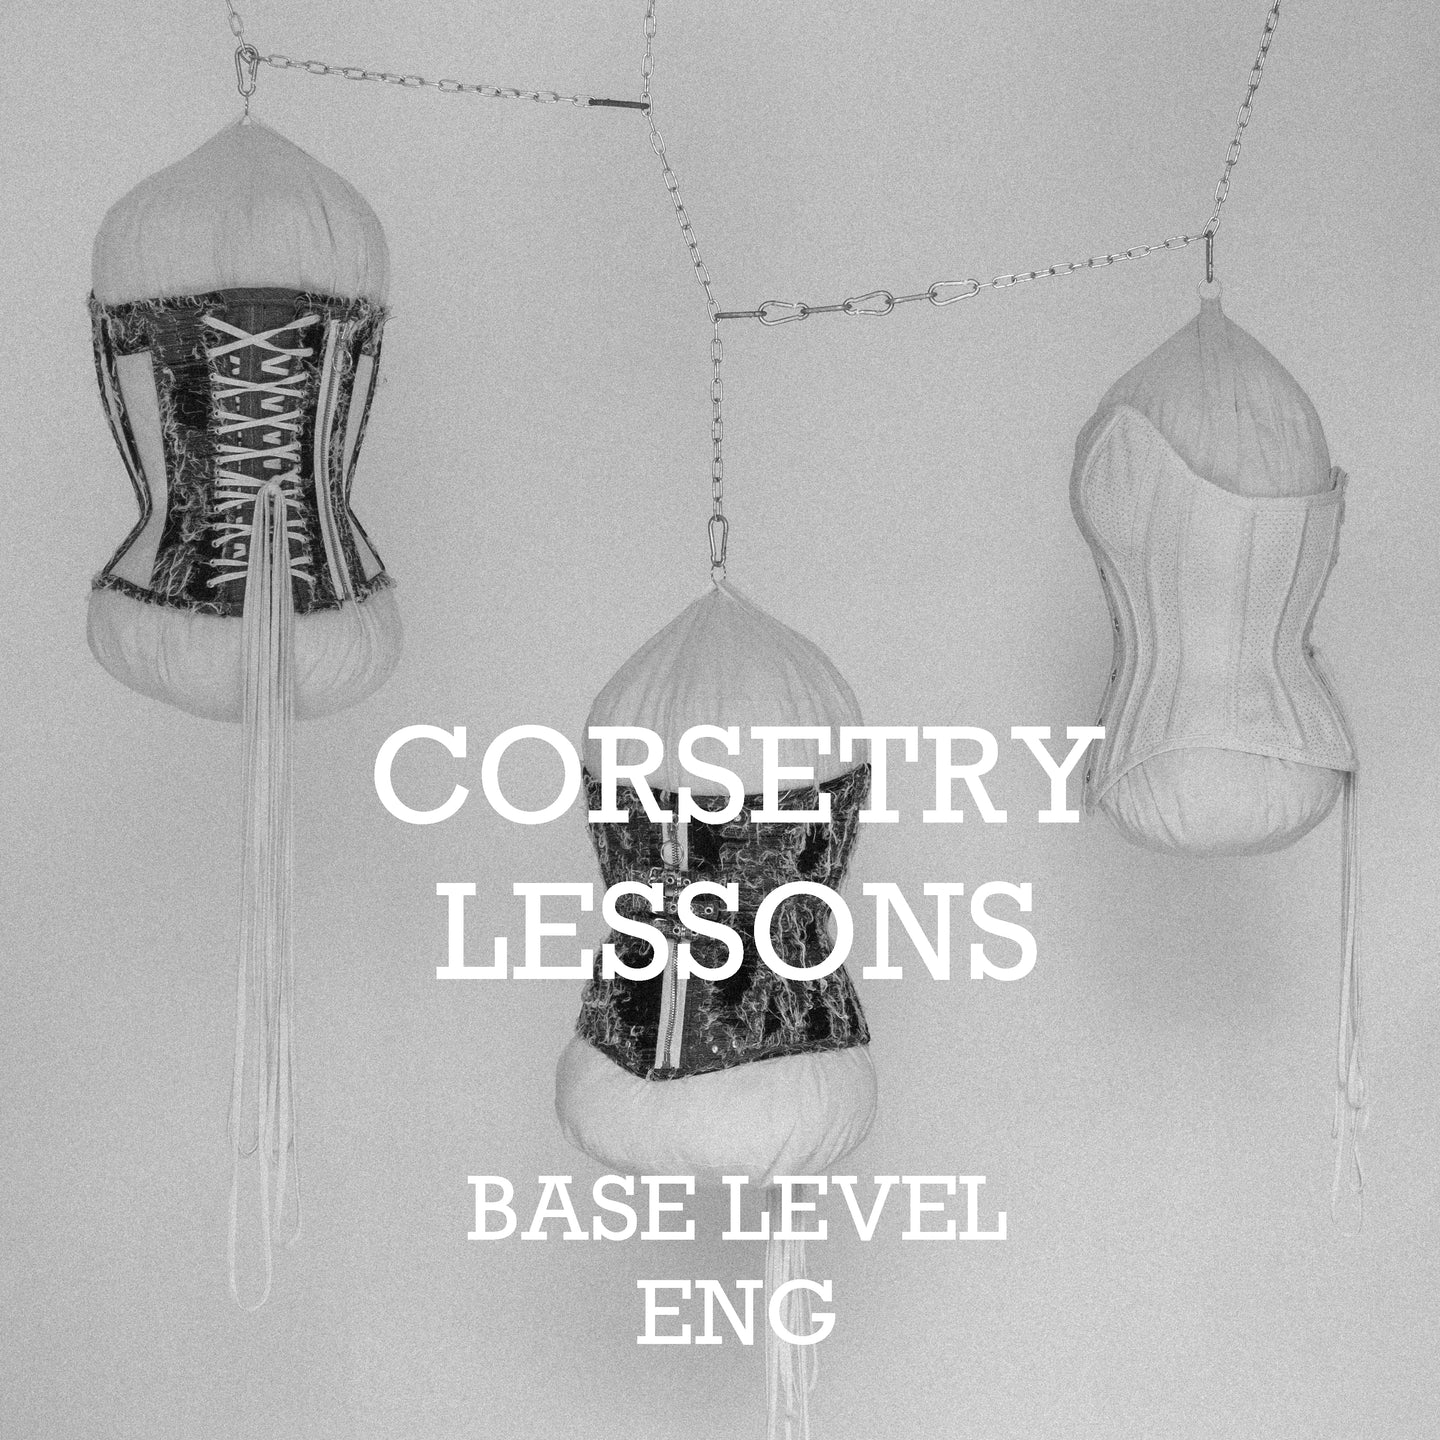 CORSETRY LESSONS - base level ENG